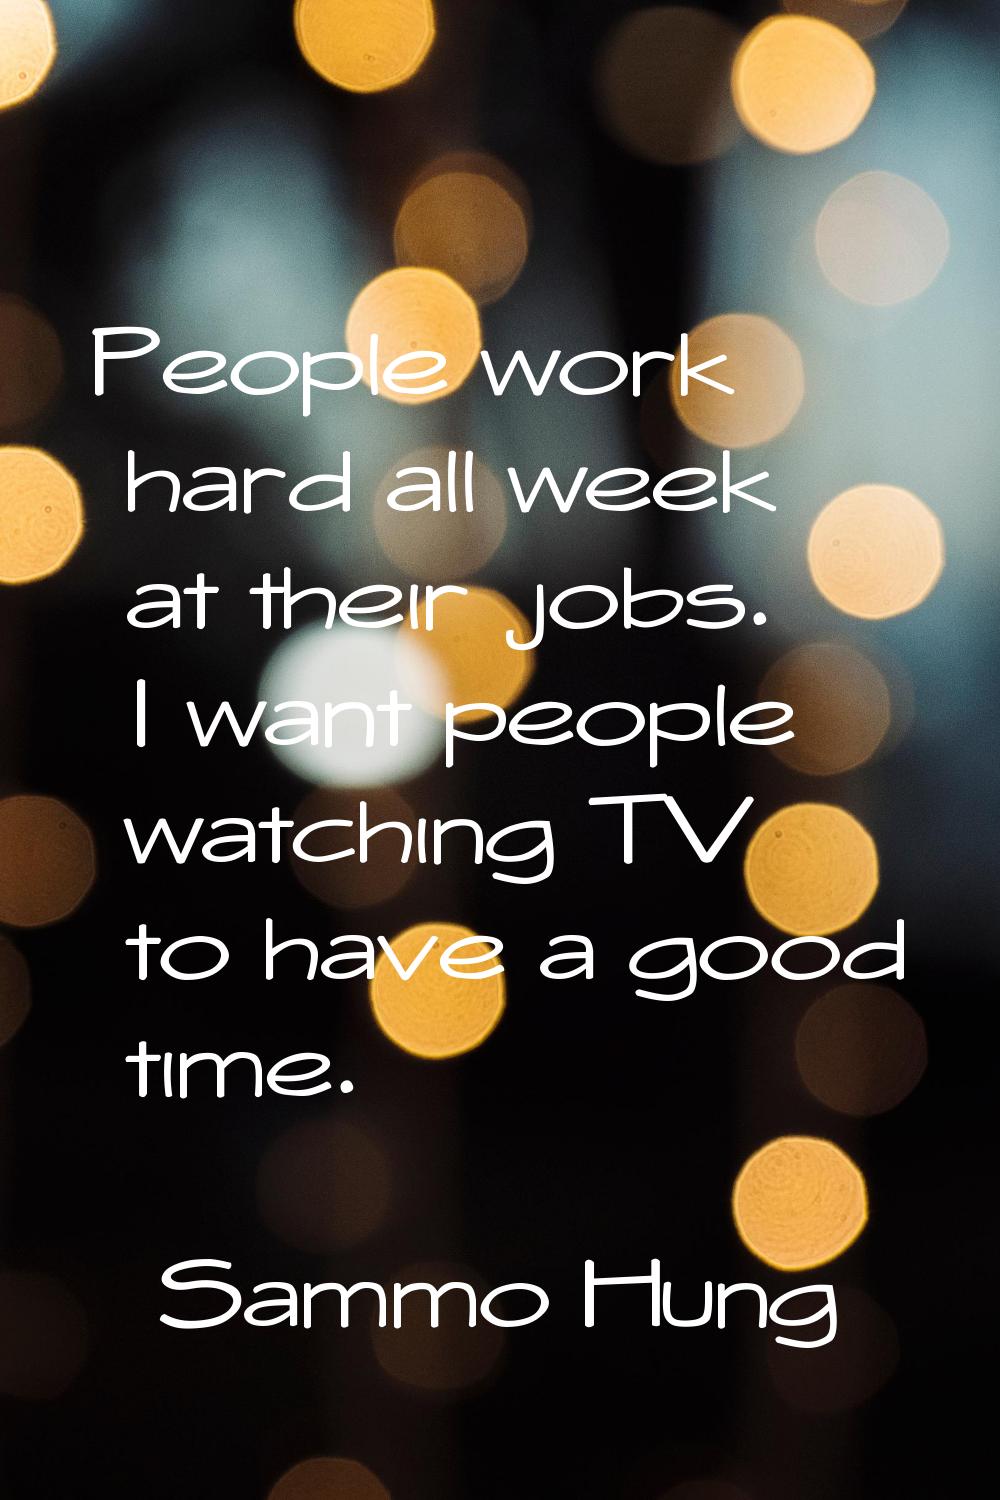 People work hard all week at their jobs. I want people watching TV to have a good time.